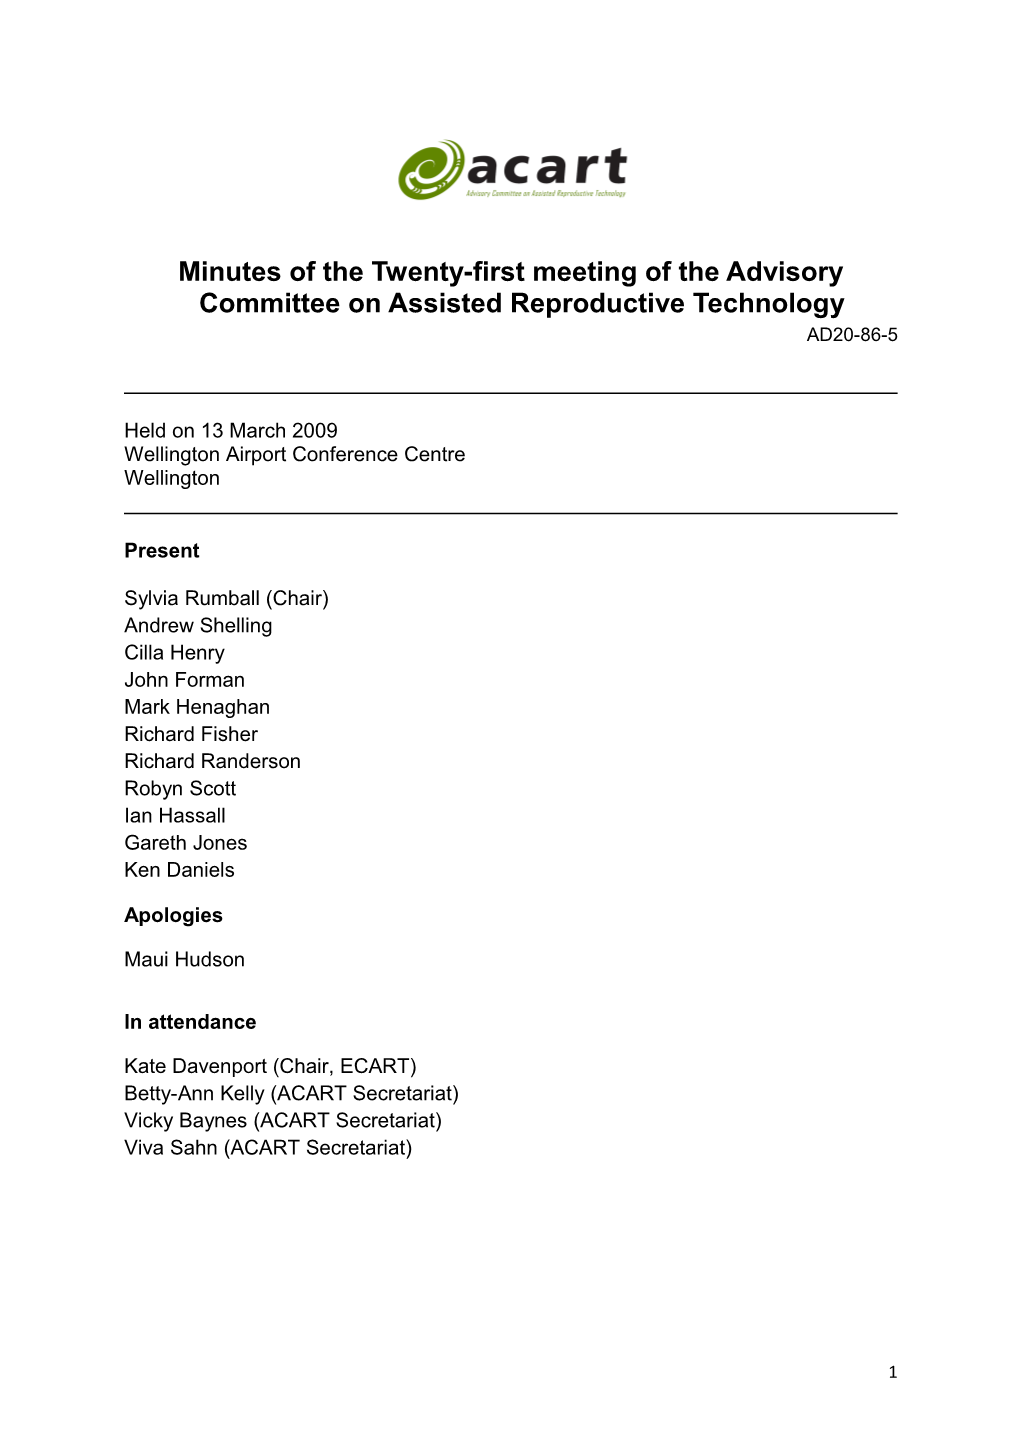 Minutes of the Twenty-First Meeting of the Advisory Committee on Assisted Reproductive